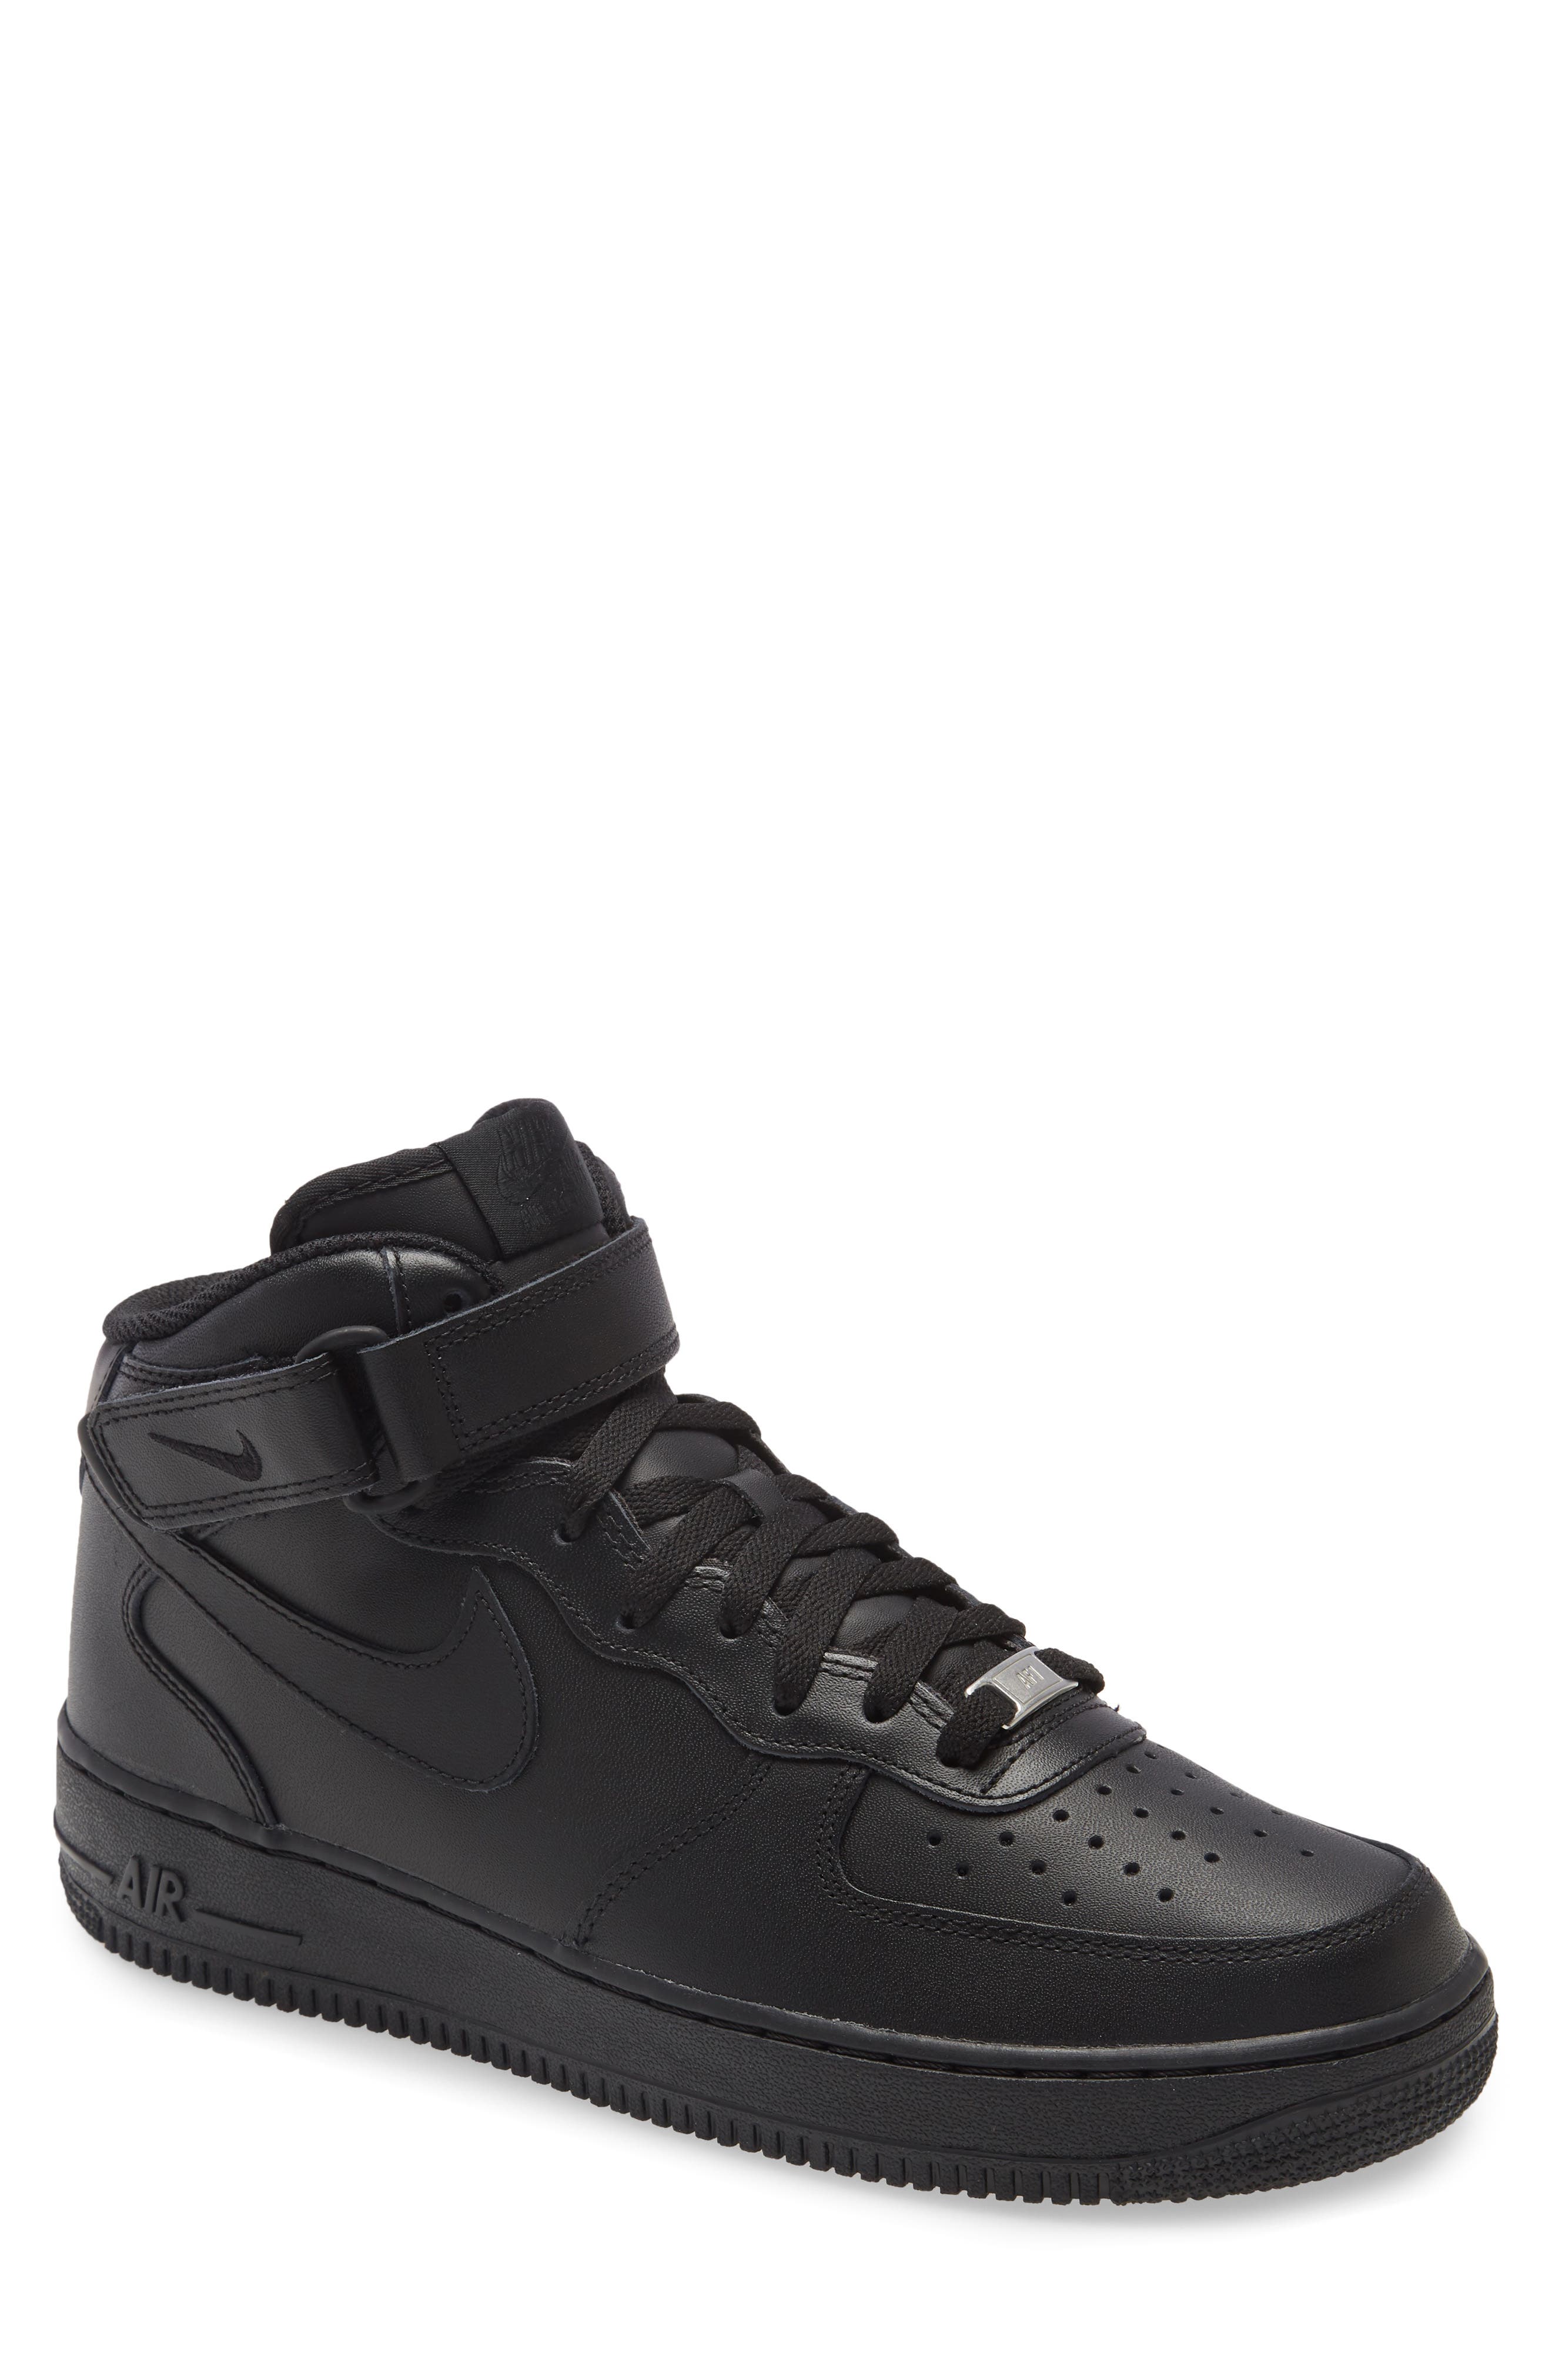 UPC 883418228439 product image for Men's Nike Air Force 1 Mid '07 Sneaker, Size 11 M - Black | upcitemdb.com